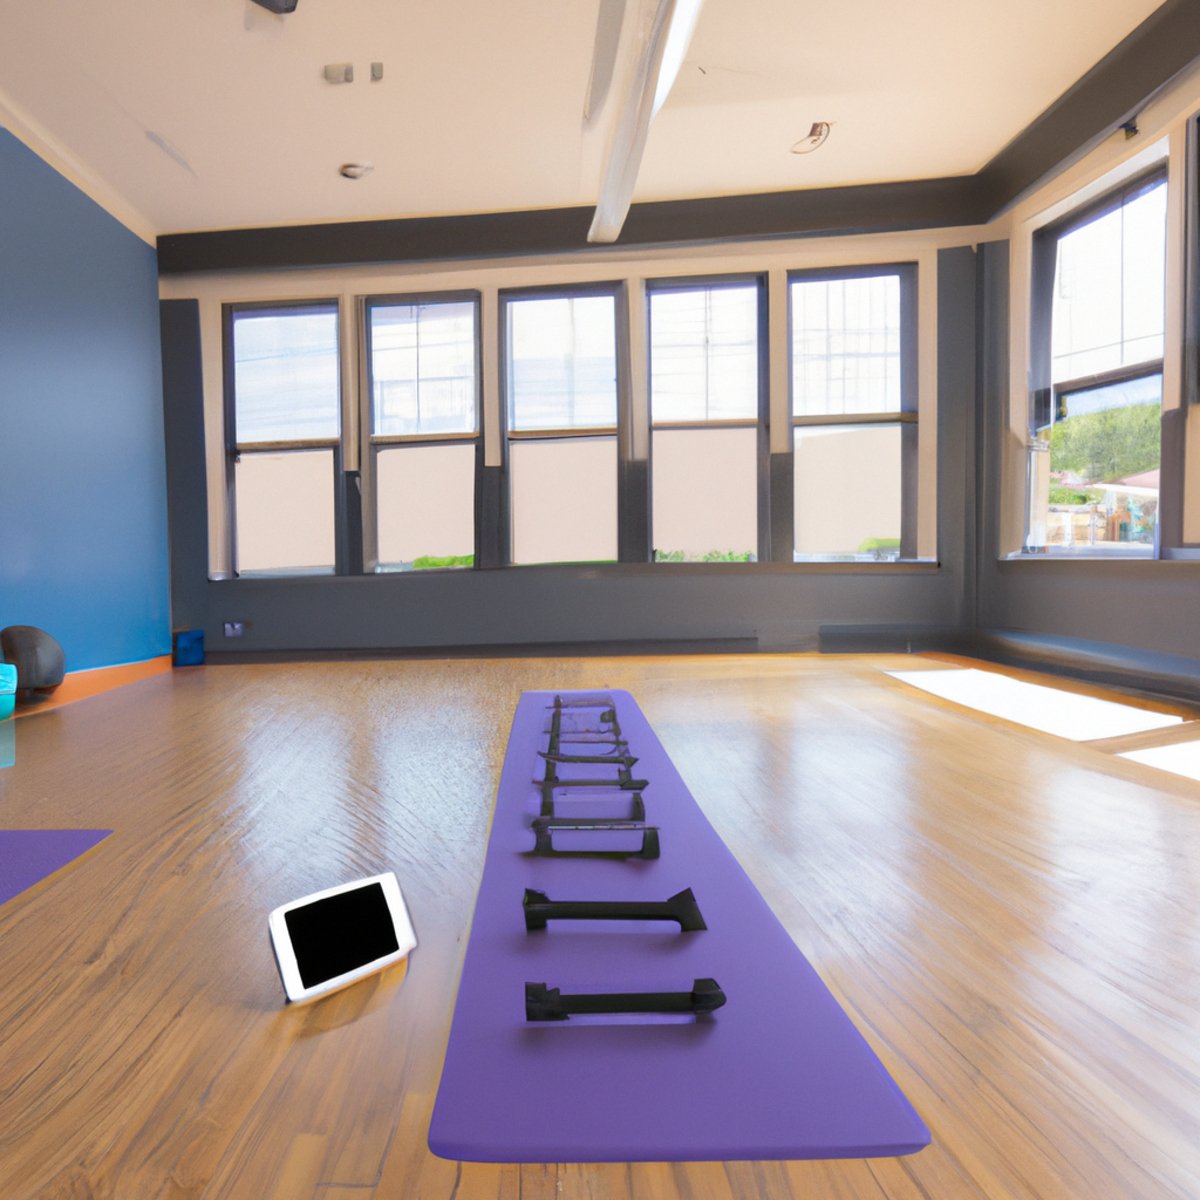 The photo shows a bright and spacious room with hardwood floors and large windows letting in natural light. In the center of the room, there is a yoga mat with a set of dumbbells and a resistance band nearby. On the wall, there is a mounted tablet displaying a virtual fitness class with an instructor leading a group of participants through a workout. The participants are shown on the screen, each in their own square, following along with the instructor's movements. In the foreground, there is a water bottle and a towel, indicating that the workout is intense and requires hydration and sweat management. The overall vibe of the photo is energetic and motivating, encouraging the viewer to try out virtual fitness classes to reach their fitness goals faster.